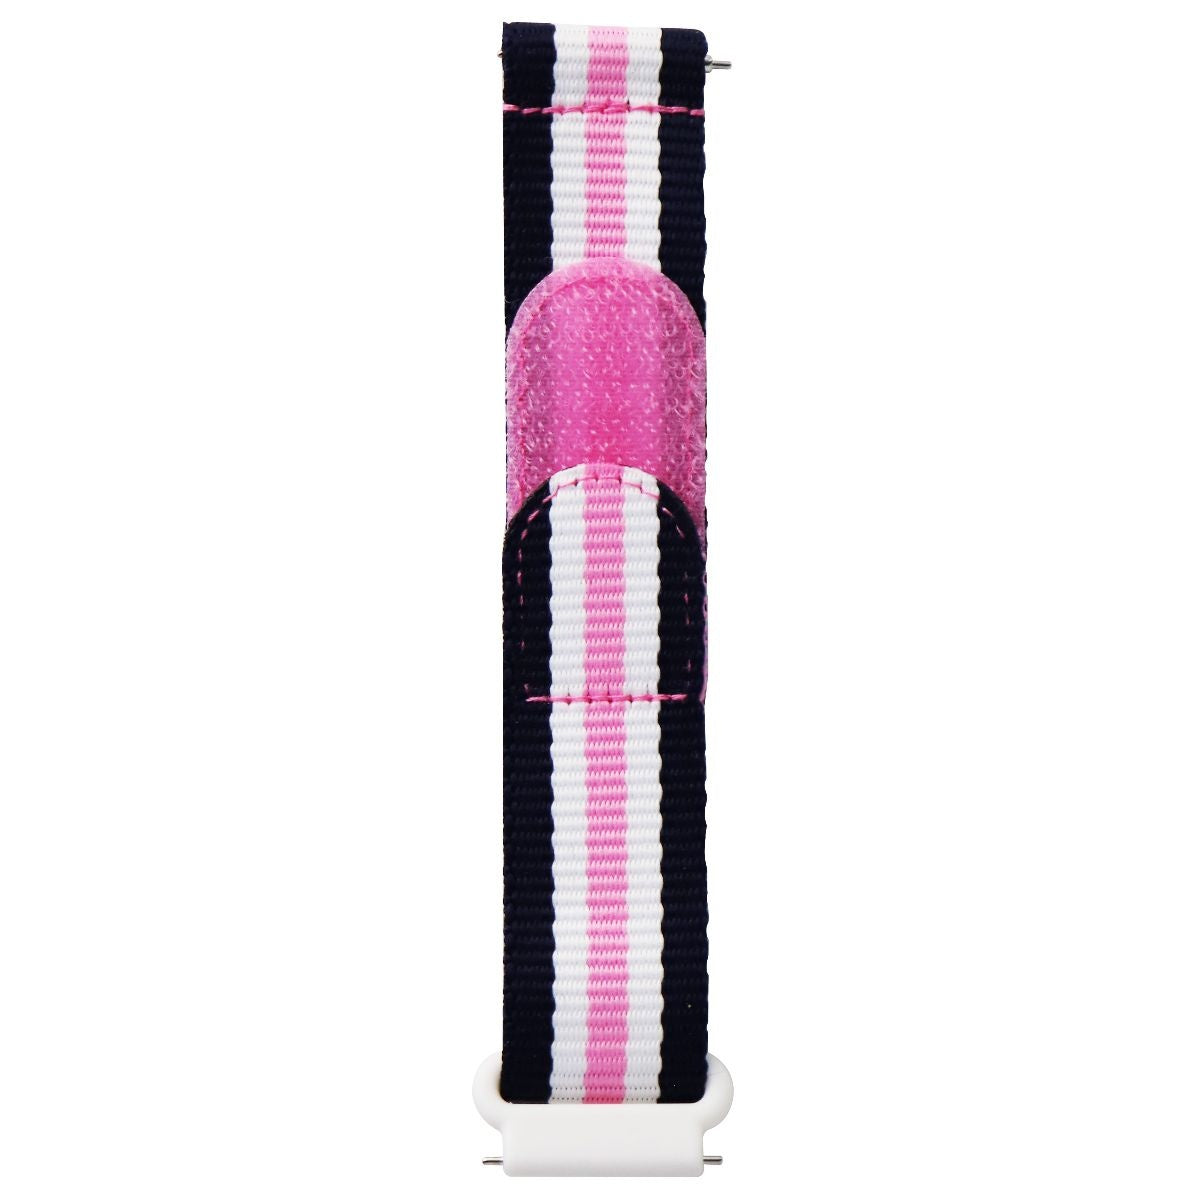 Gizmo Nylon Band for GizmoWatch (X53N3S) - Kids Size - Pink/White/Navy Stripe Smart Watch Accessories - Watch Bands Gizmo    - Simple Cell Bulk Wholesale Pricing - USA Seller